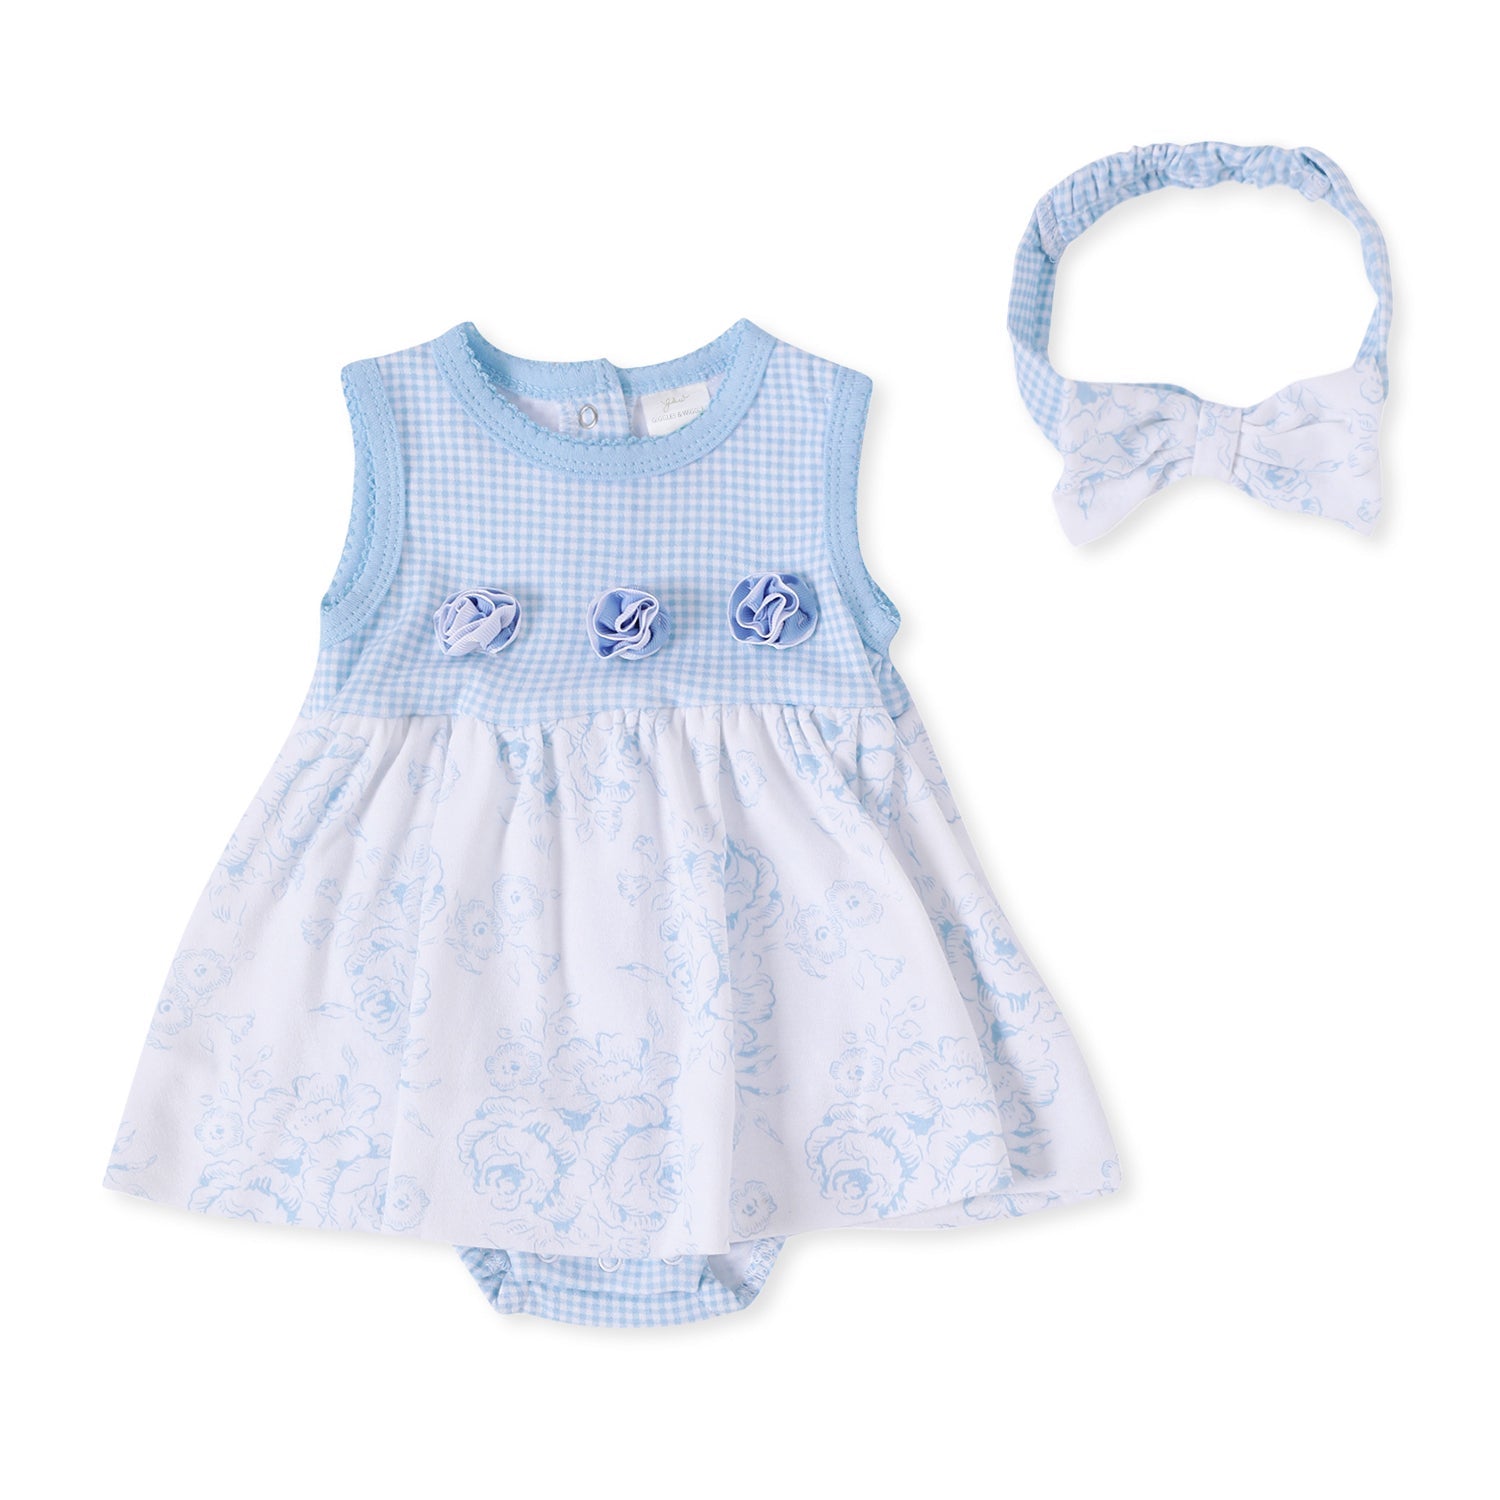 Giggles & Wiggles Let's Twirl Powder Blue Floral Dress With Accessories